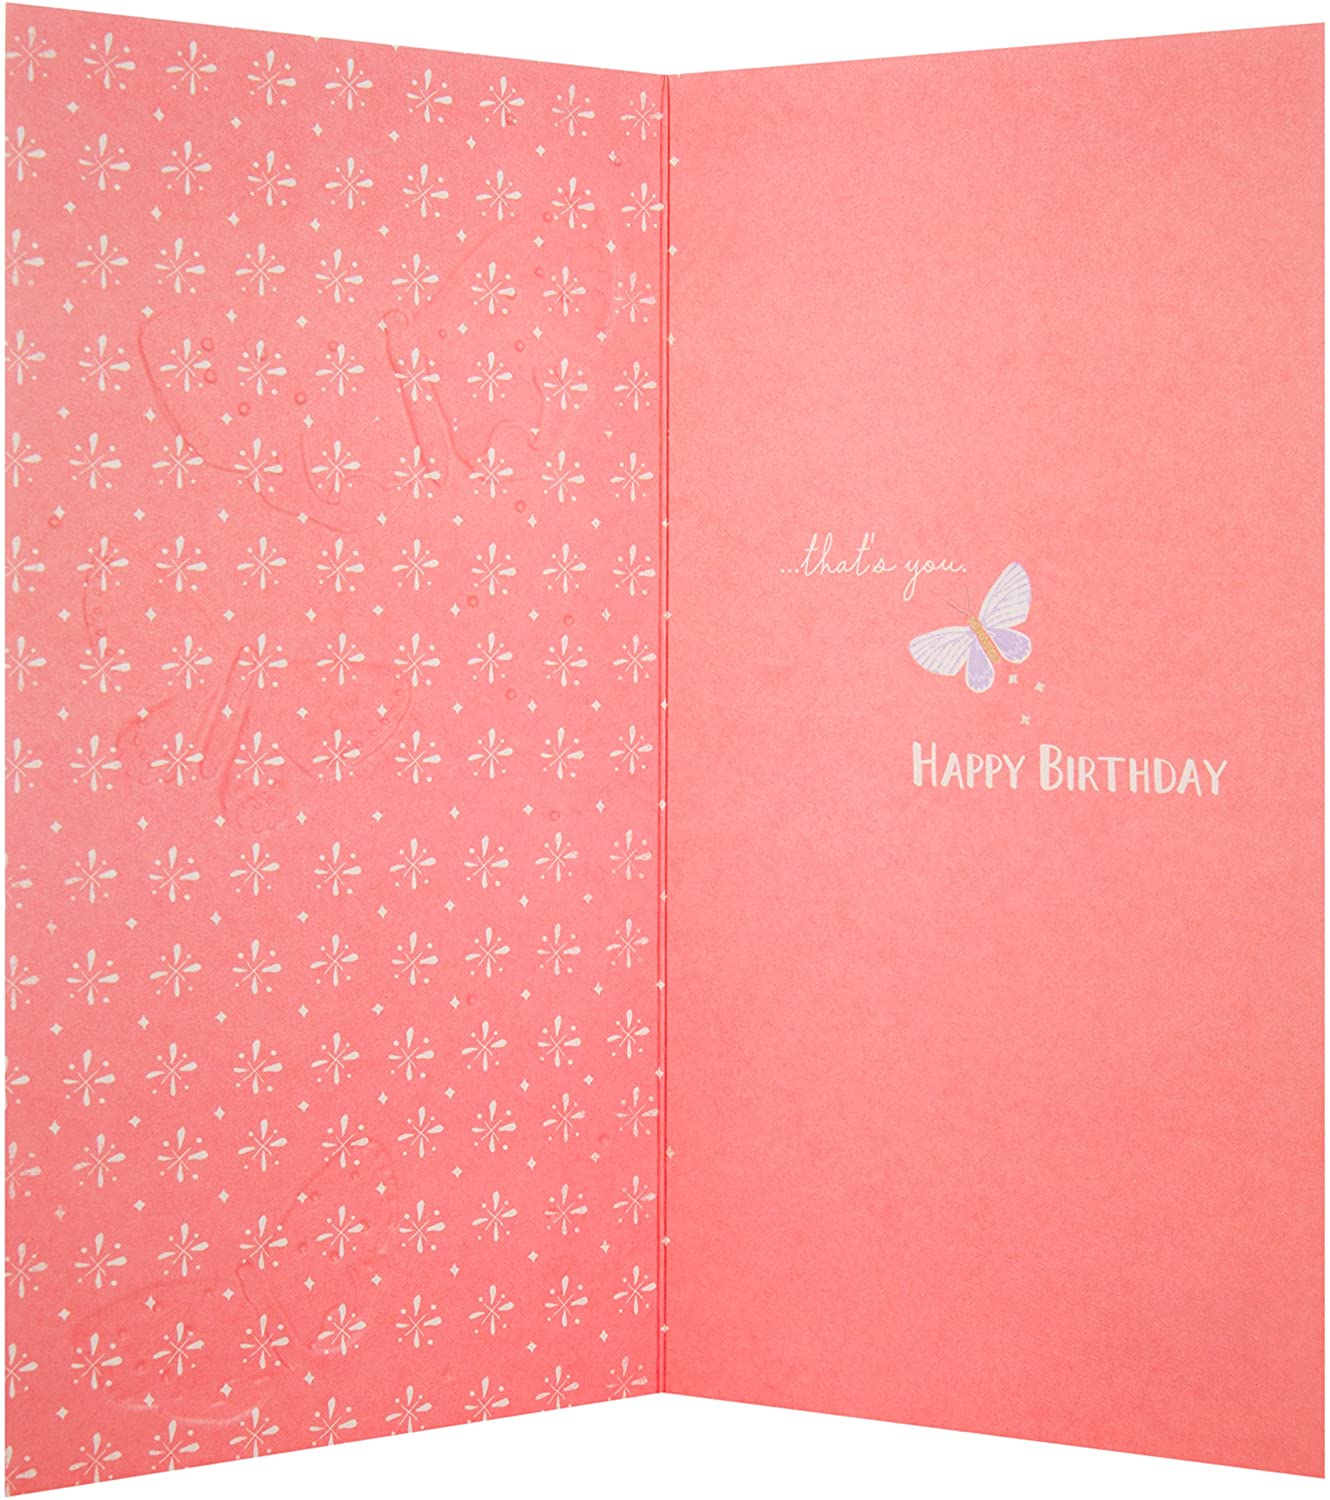 Cousin Birthday Card Lovely Like A Butterfly 